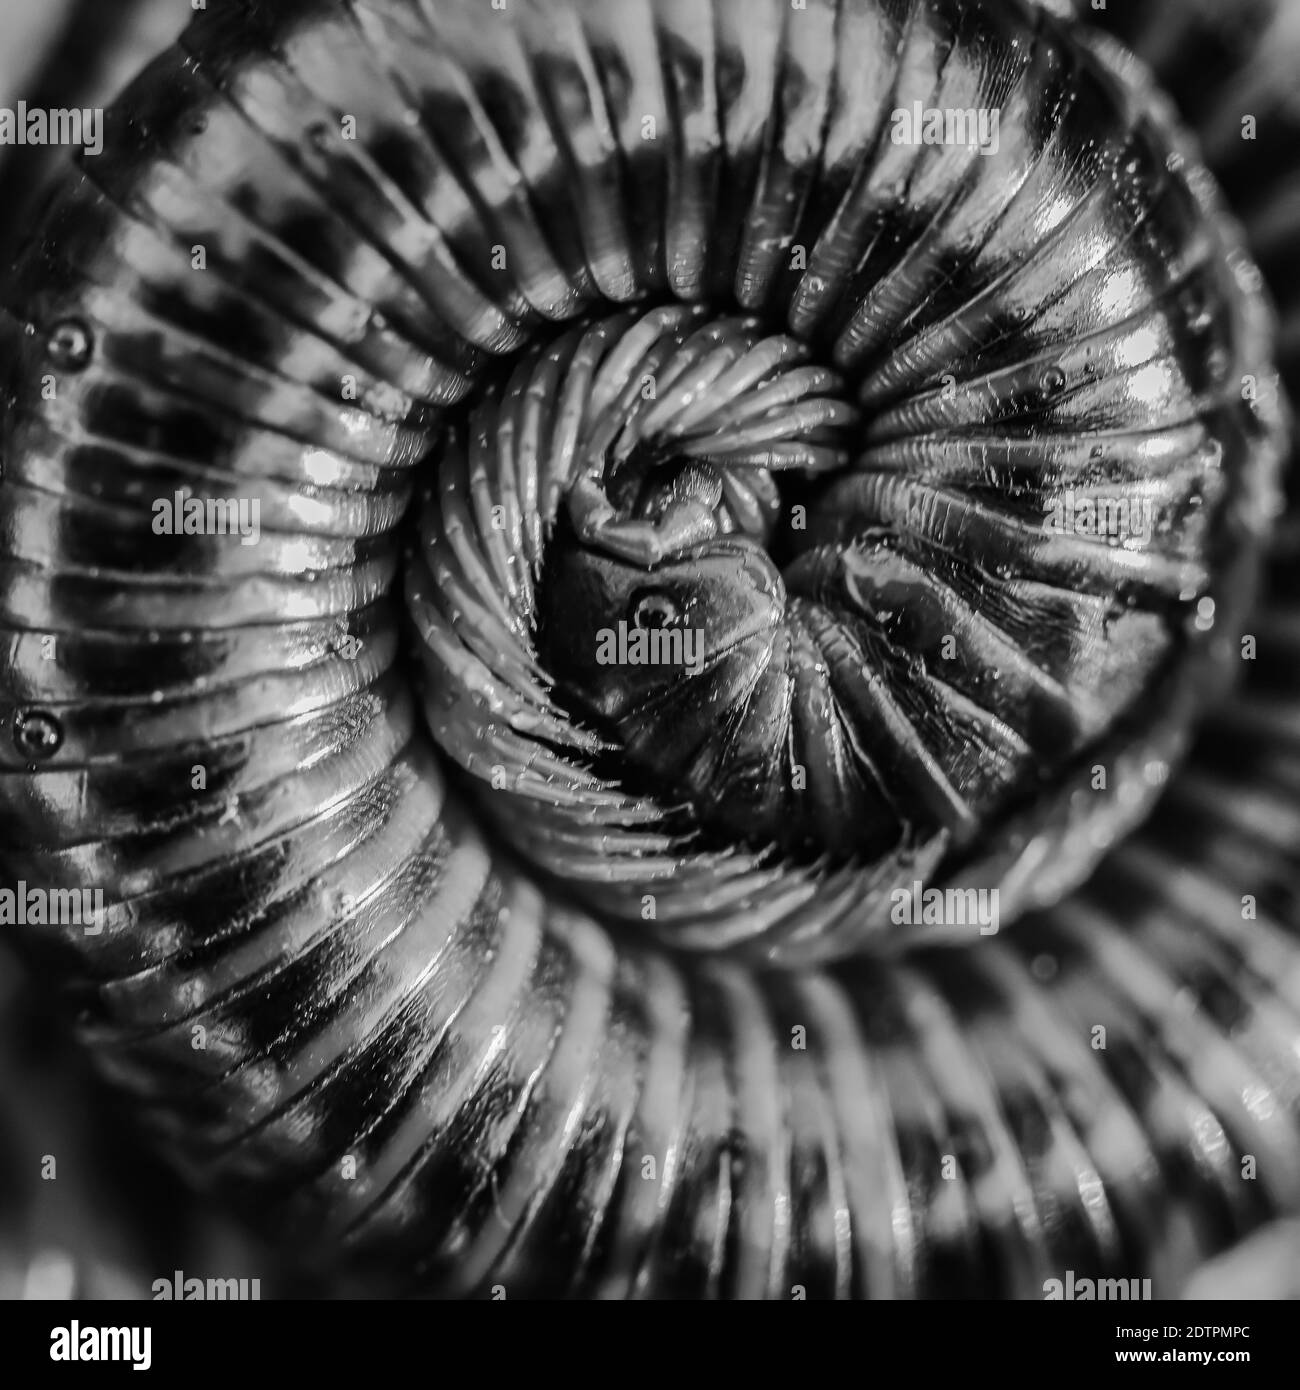 Monochrome abstract image of a centipede with its legs and body coiled up Stock Photo